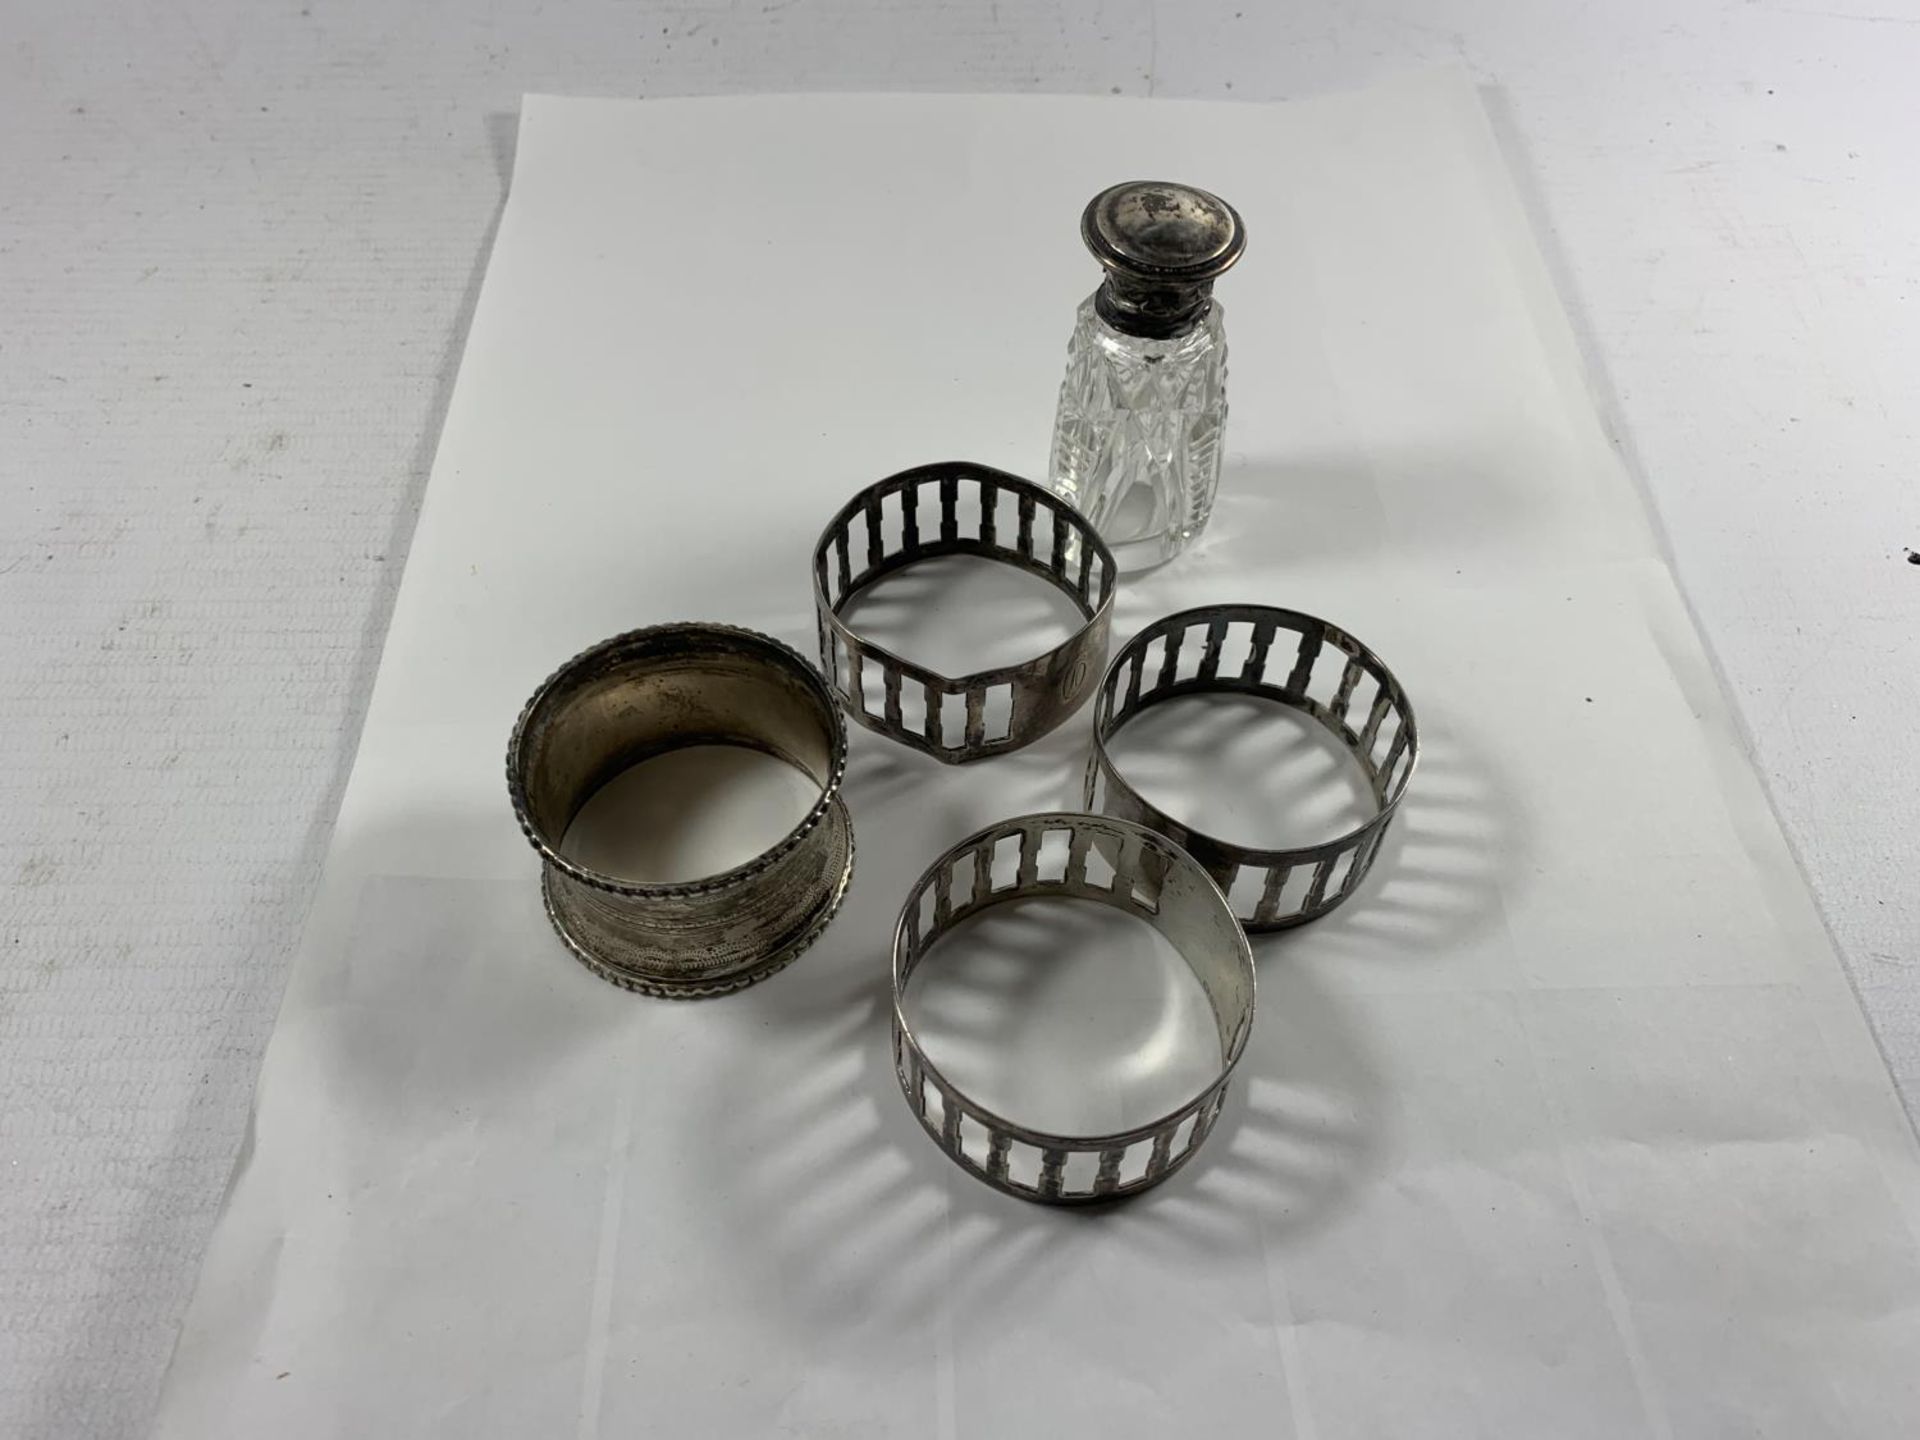 FOUR SILVER NAPKIN RINGS AND A SILVER LIDDED PERFUME BOTTLE WITH STOPPER - Image 2 of 6